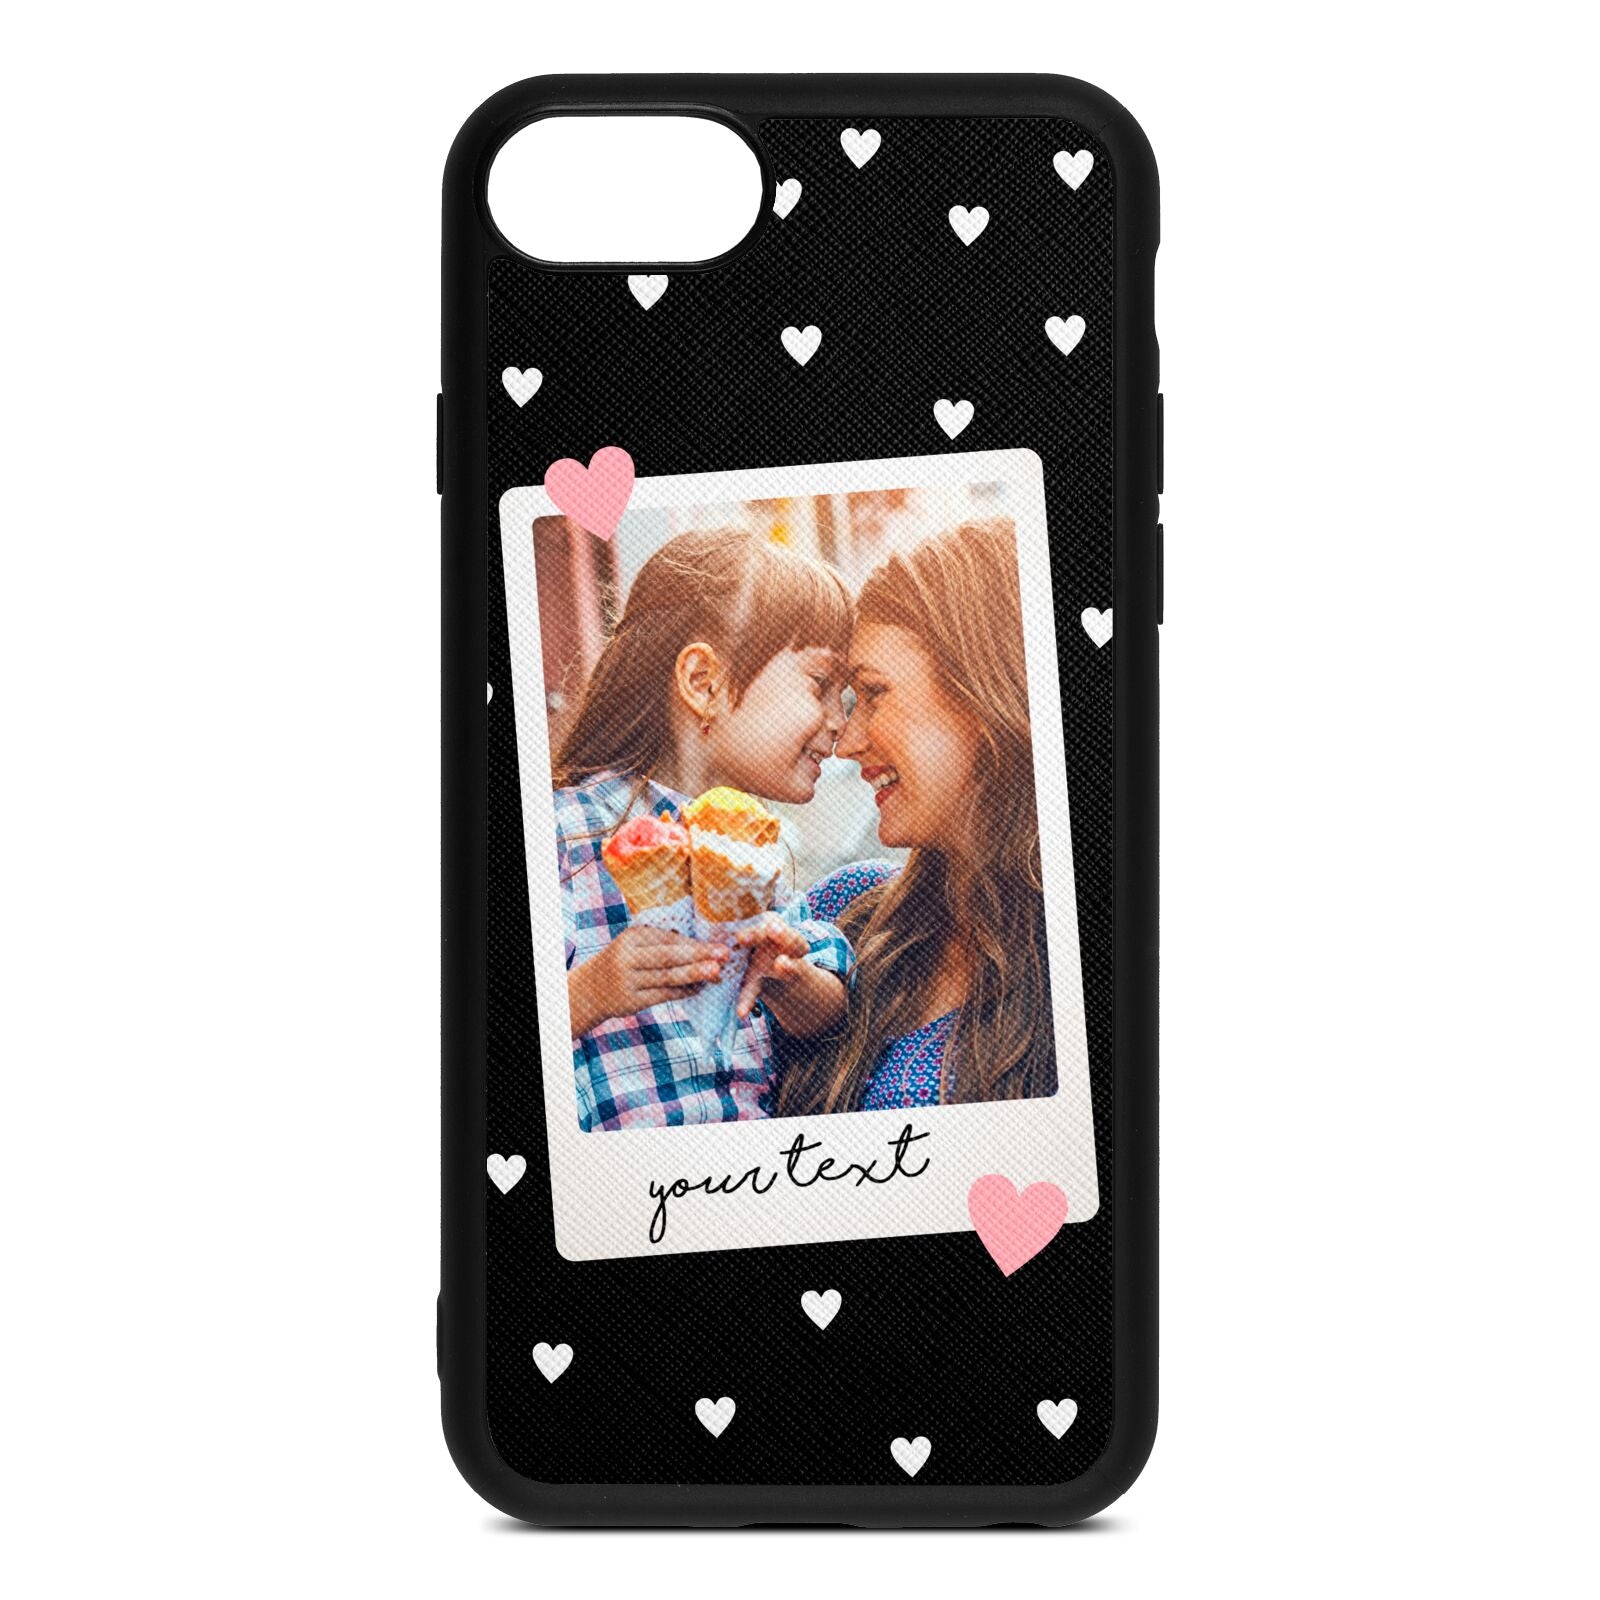 Personalised Photo Love Hearts Black Saffiano Leather iPhone 8 Case